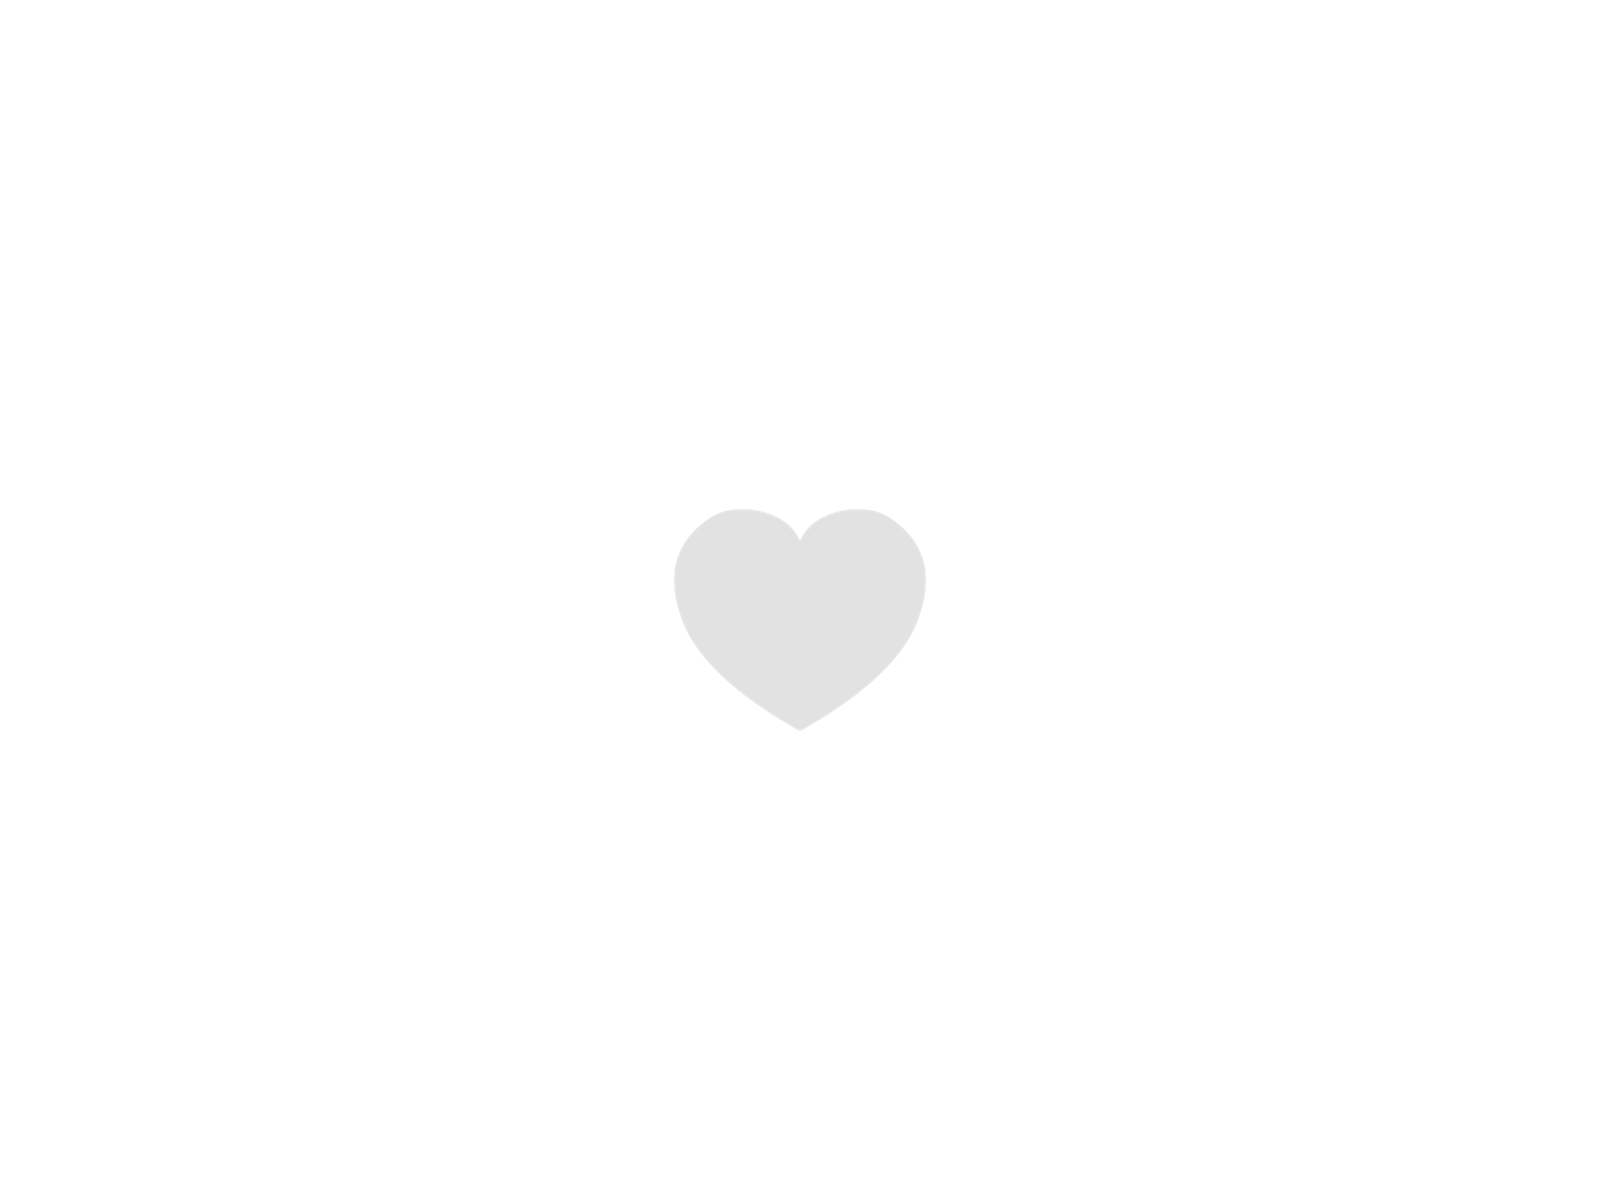 Show your heart button flat heart like micro interaction minimal